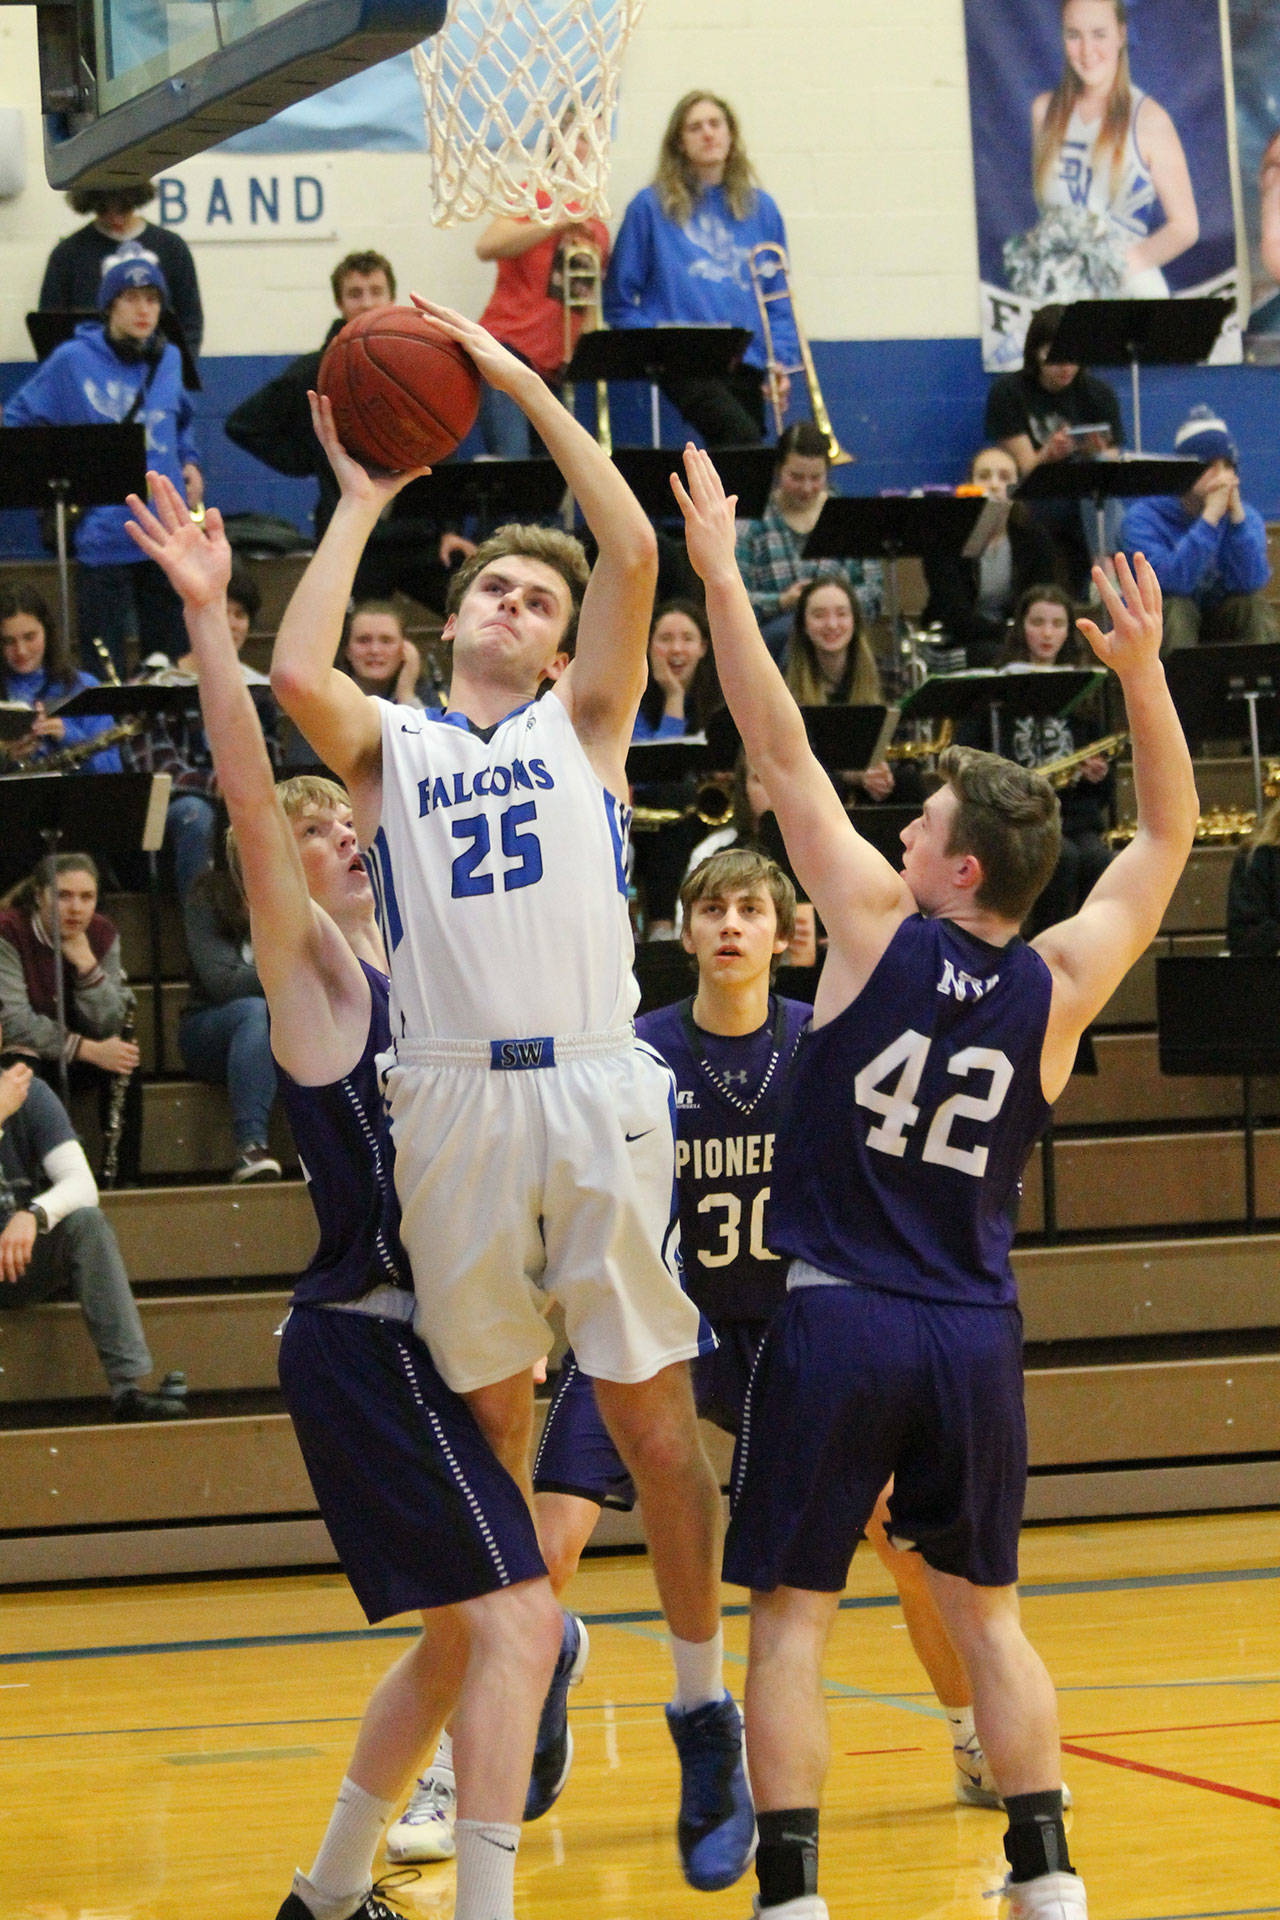 Levi Buck powers to the hoop for the Falcons. (Photo by Jim Waller/South Whidbey Record)